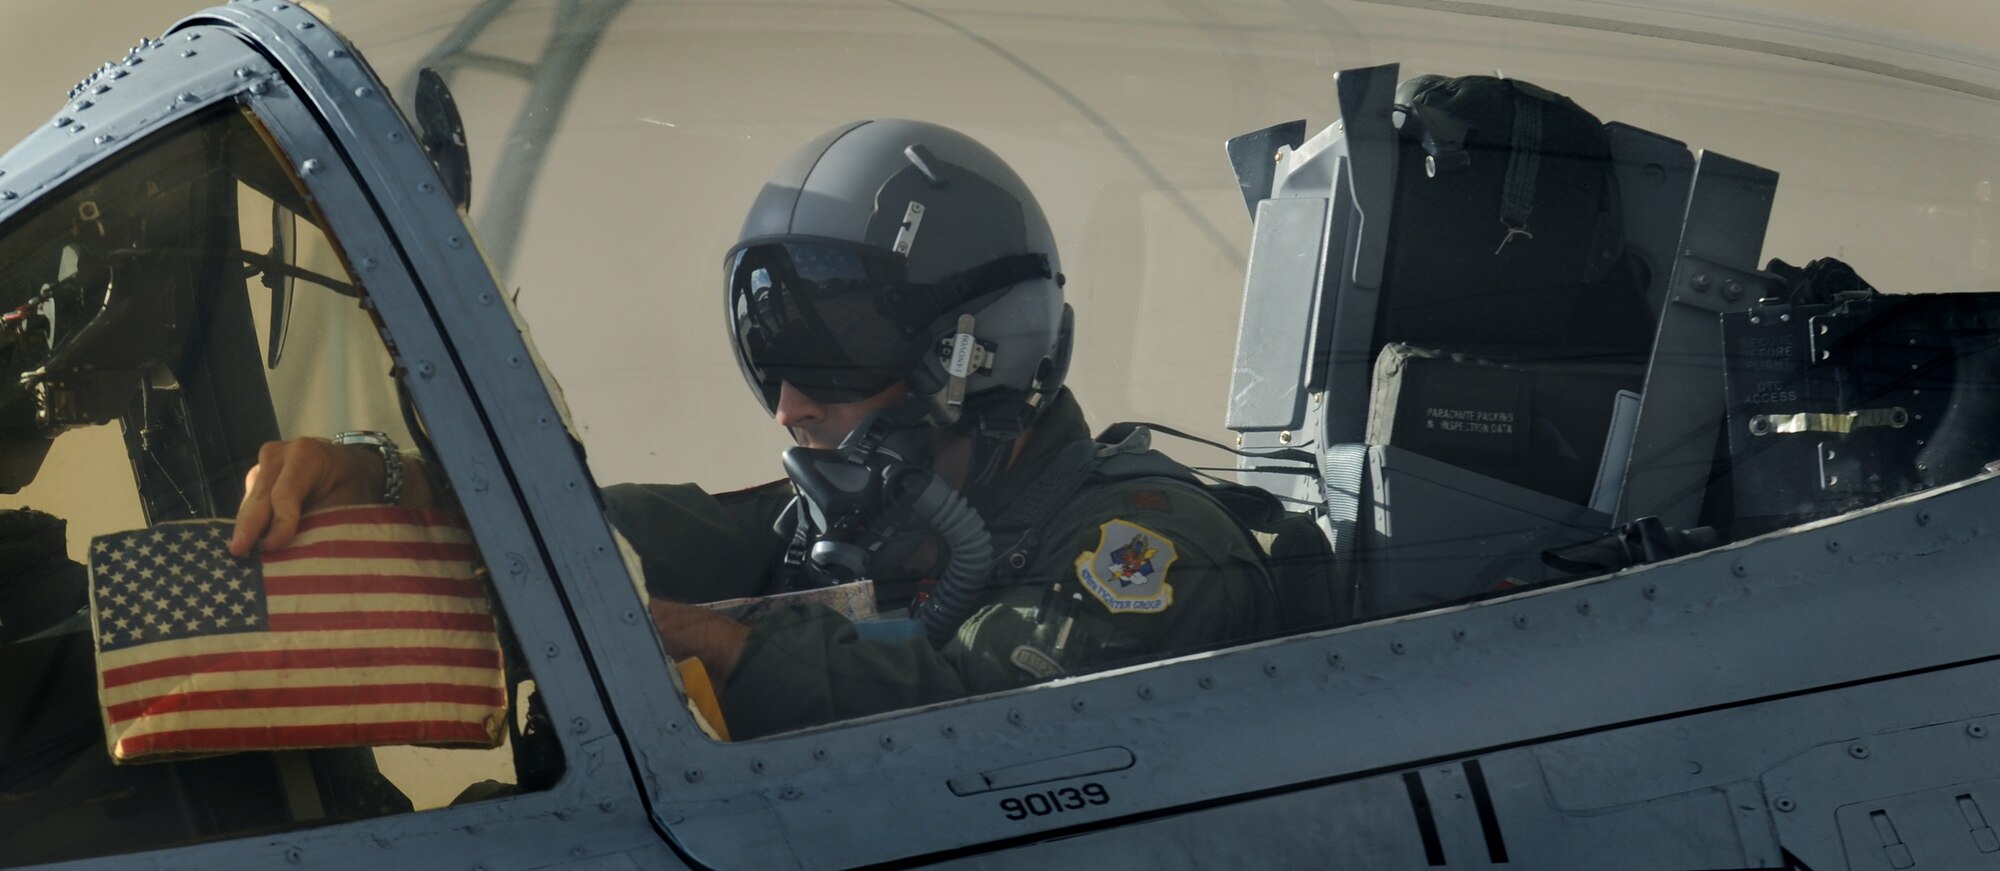 MOODY AIR FORCE BASE, Ga. – Maj. John Lesho, 76th Fighter Squadron A-10C pilot, displays an American flag in the cockpit of the A-10 he will fly to Red Flag at Nellis Air Force Base, Nev., here Oct. 17. (U.S. Air Force photo by Staff Sgt. Elizabeth Rissmiller)